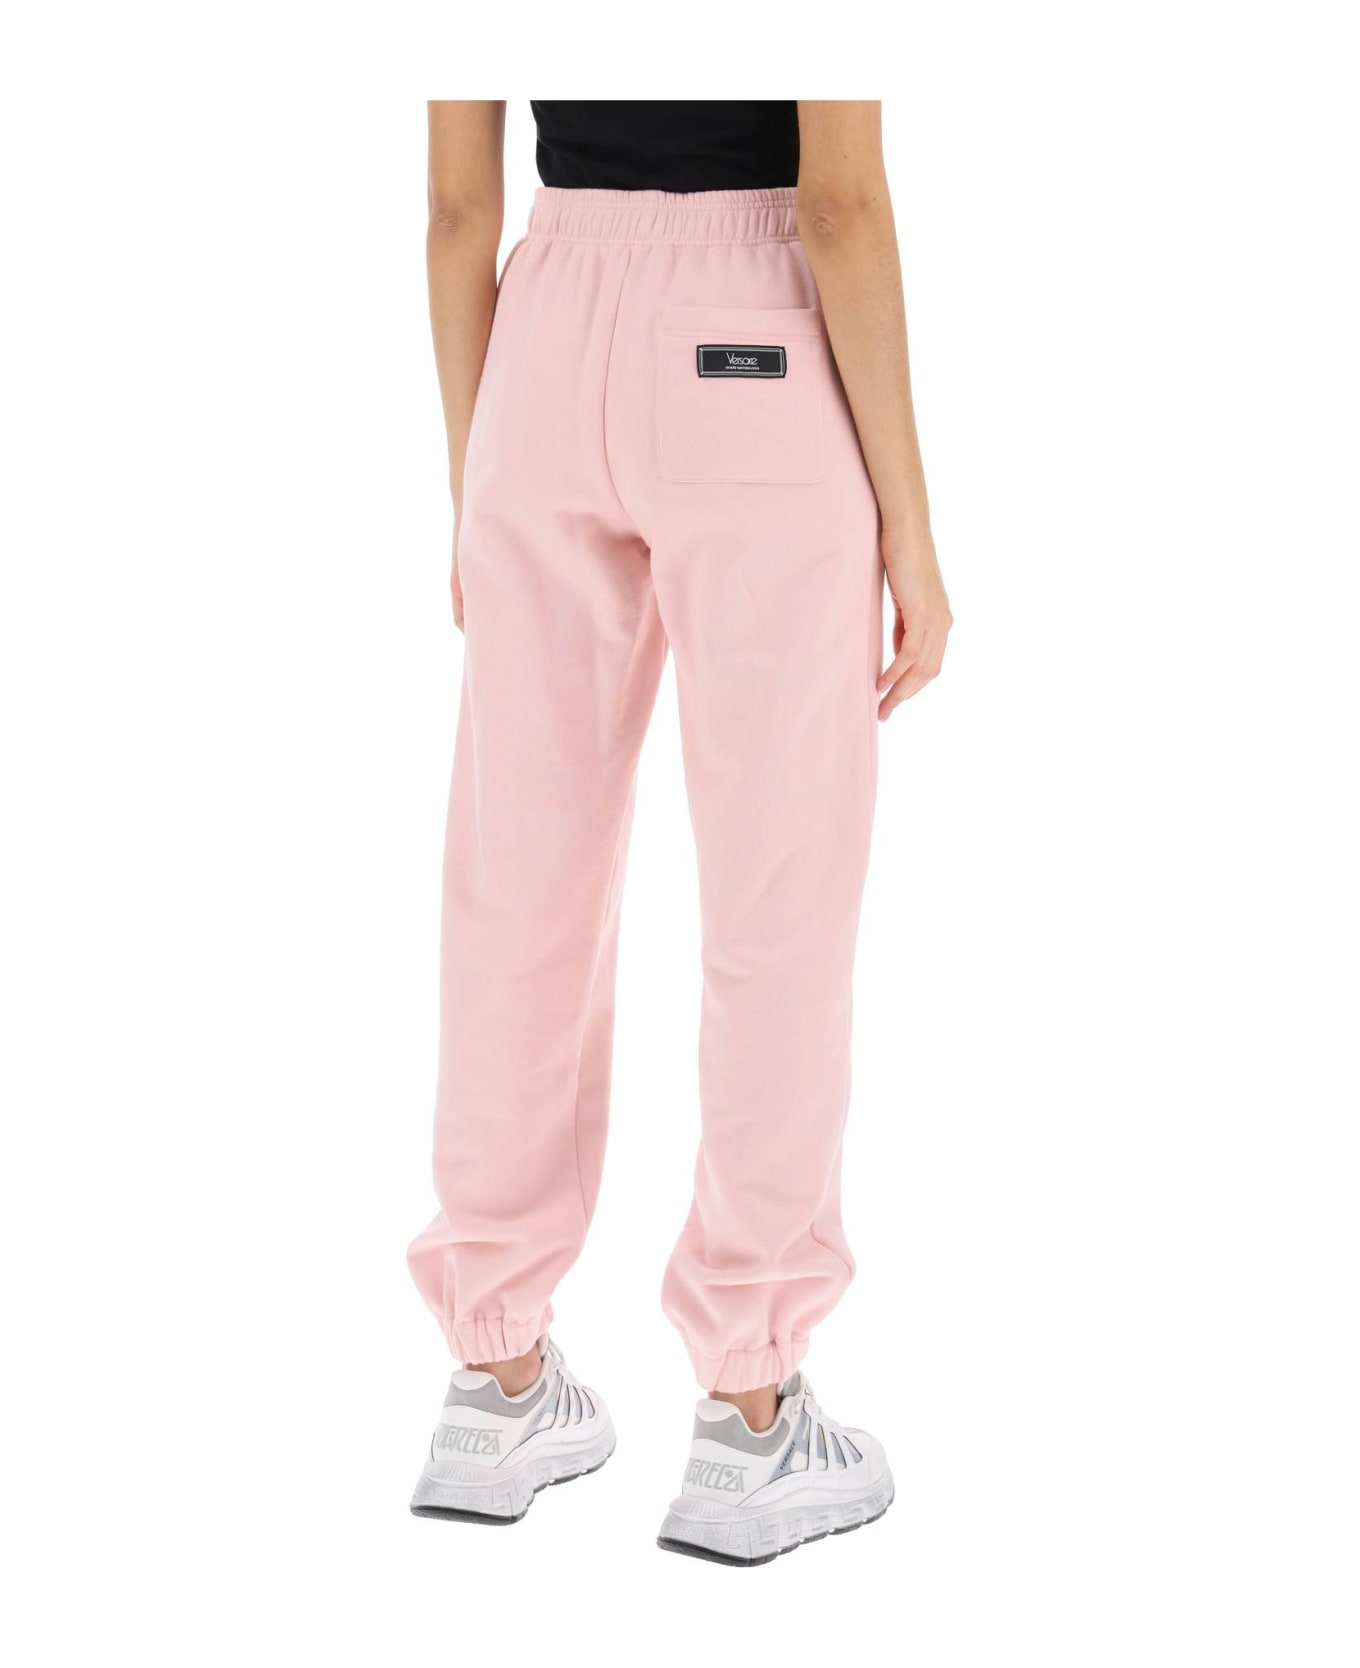 Versace 1978 Re-edition Joggers - PINK WHITE (Pink) スウェットパンツ